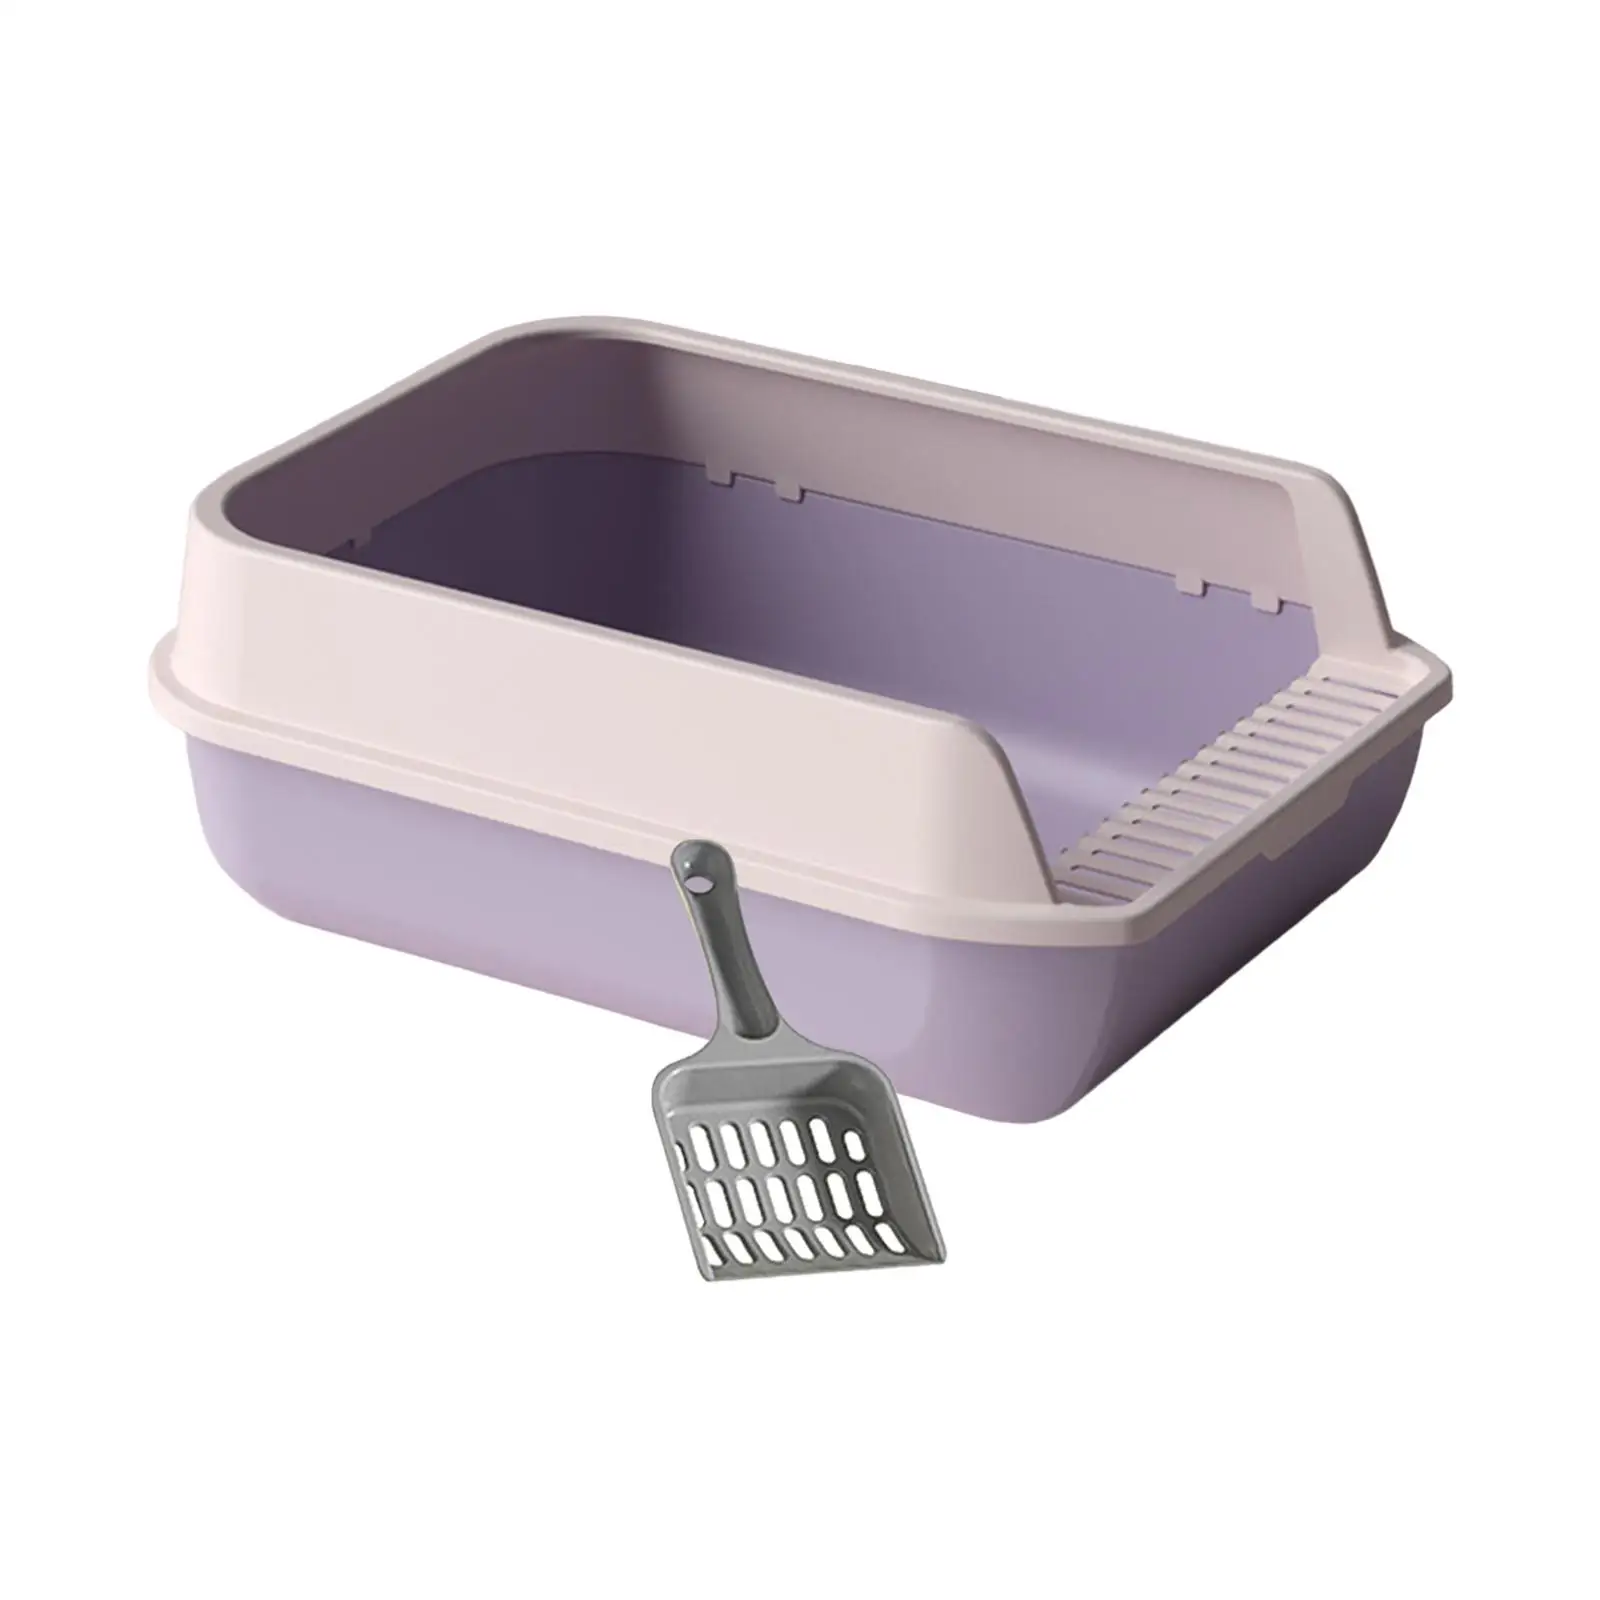 Cat Litter Box High Sided Cat Sand Box Container Portable Semi Closed Potty Toilet for Small Animals Indoor Cats Pet Accessories